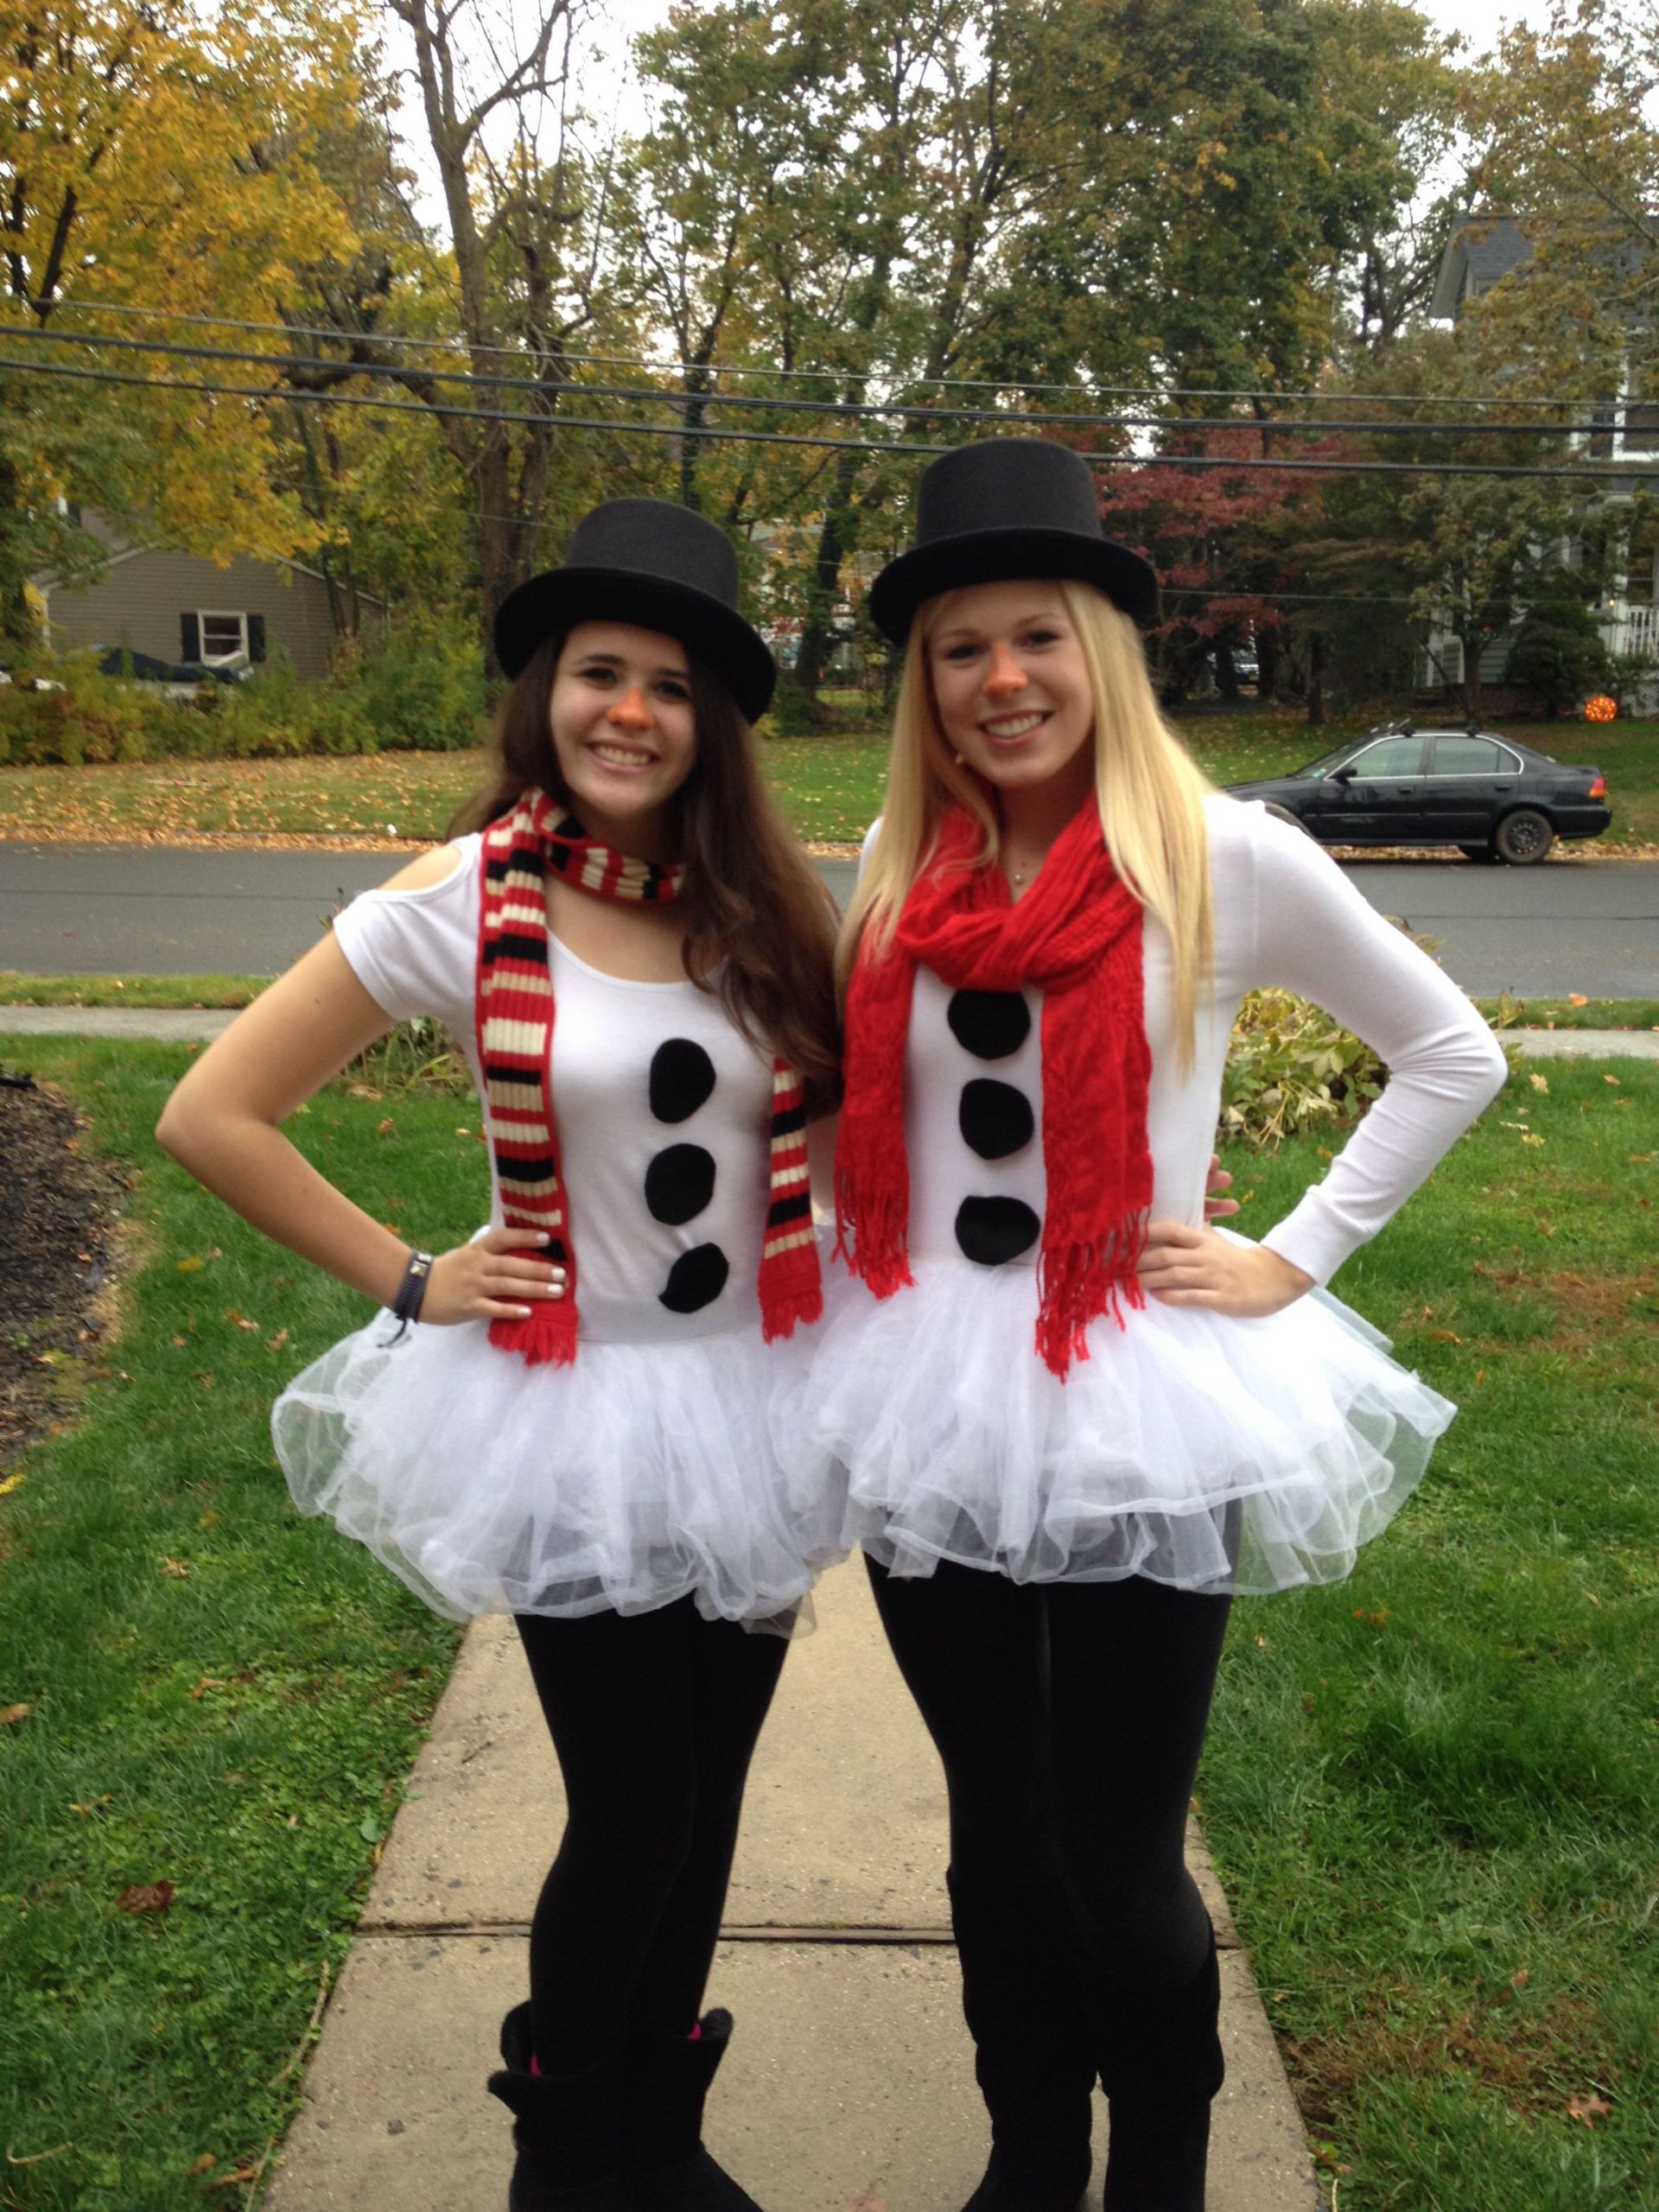 Holiday Party Costume Ideas
 snowman Halloween costume